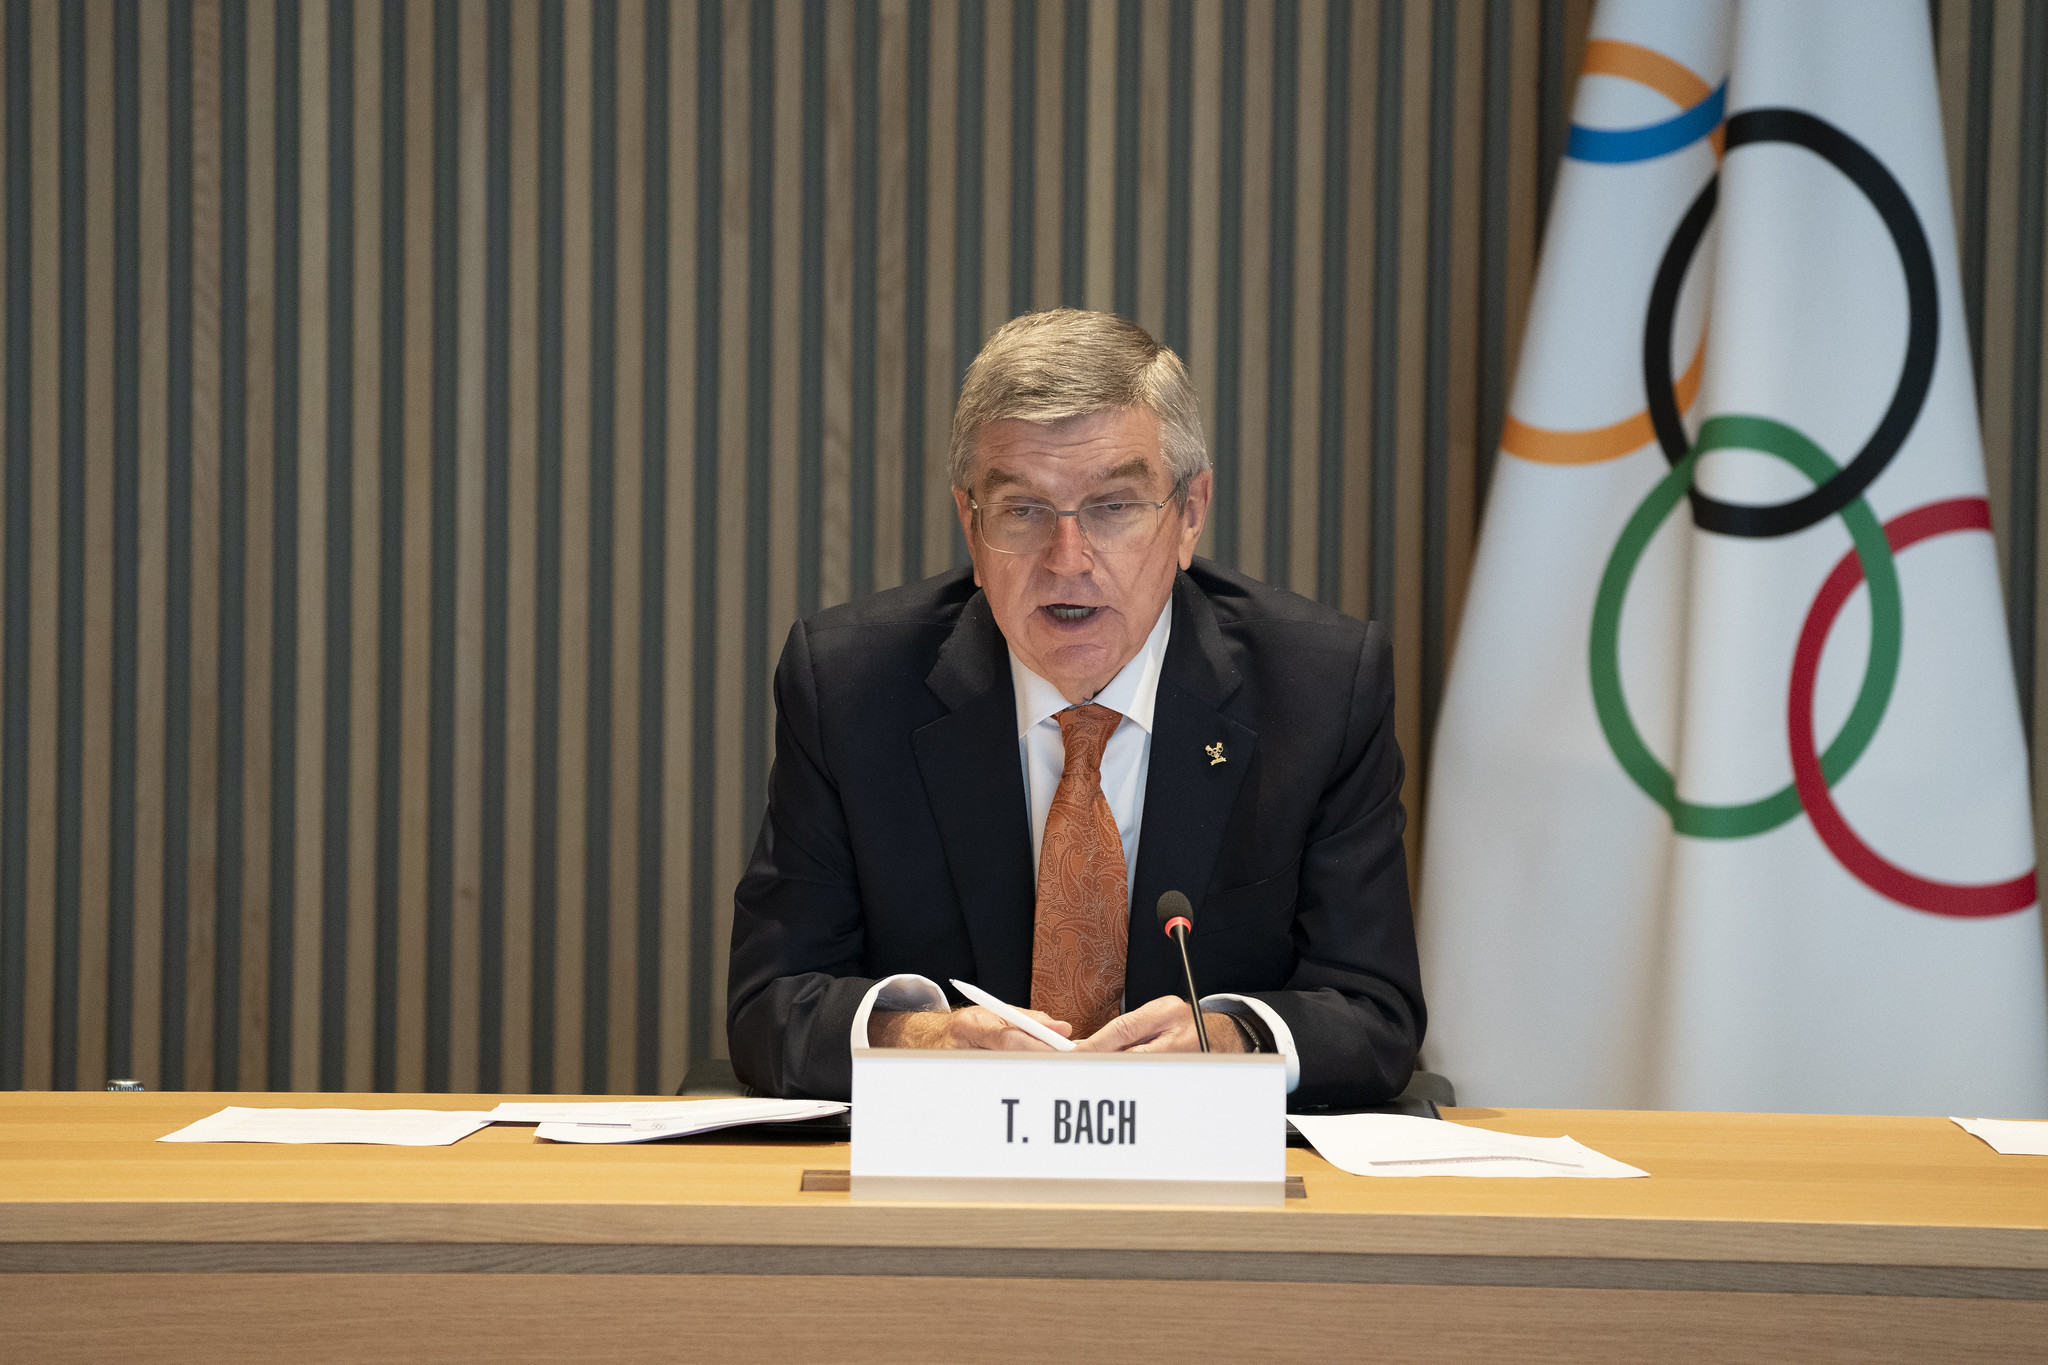 Bach to stand unopposed for re-election as IOC President in 2021